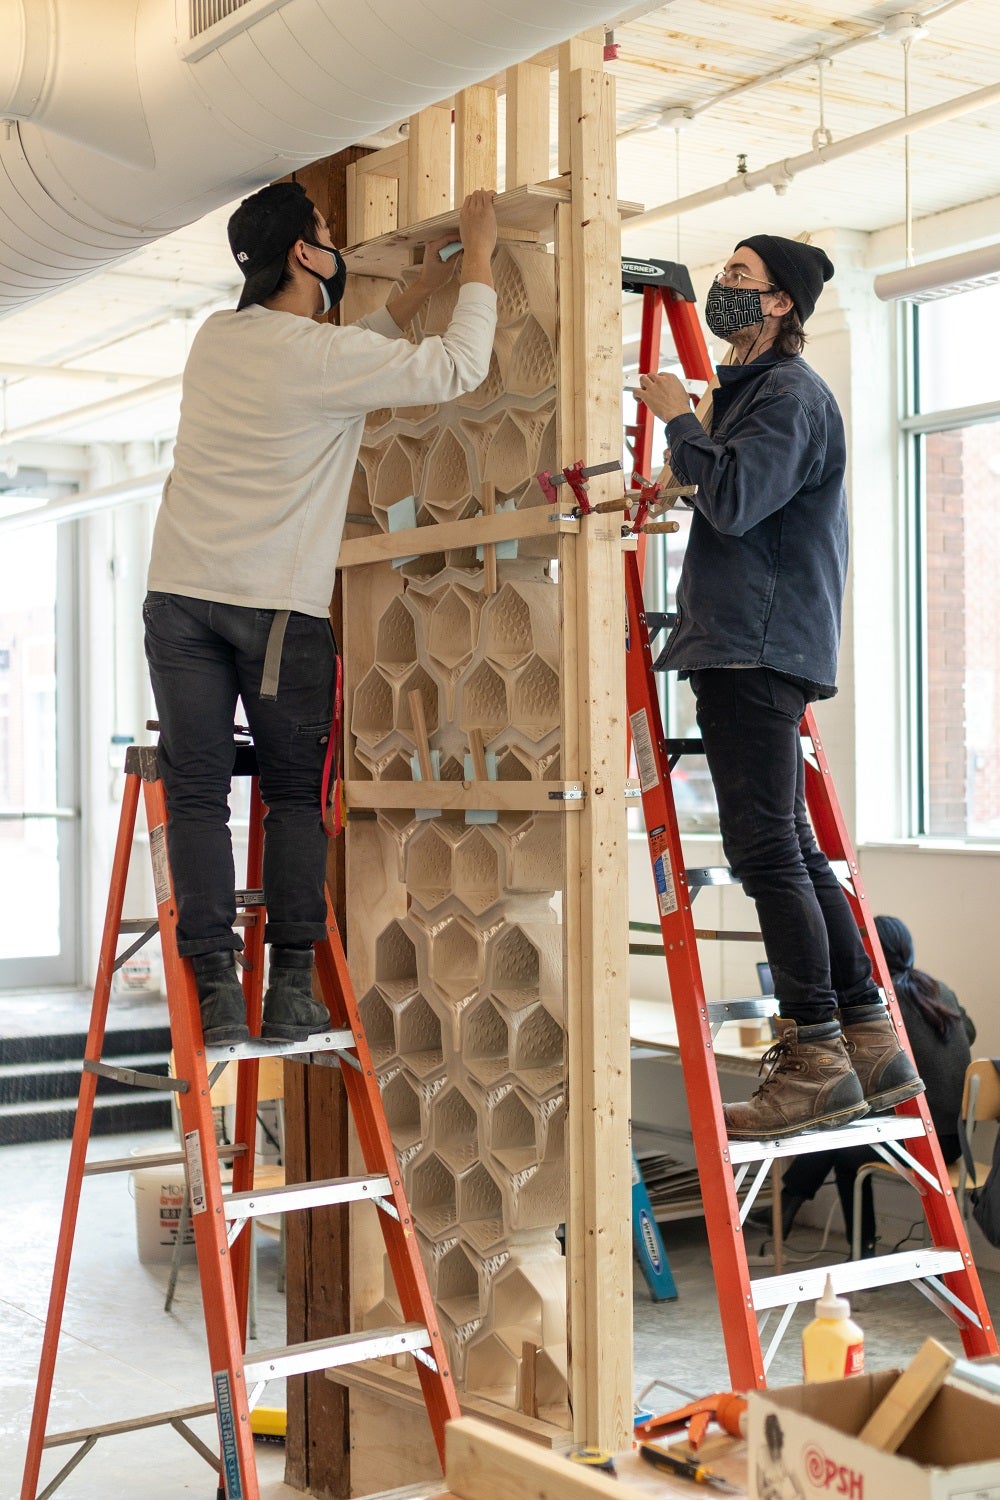 Workers assemble the Hive wall.